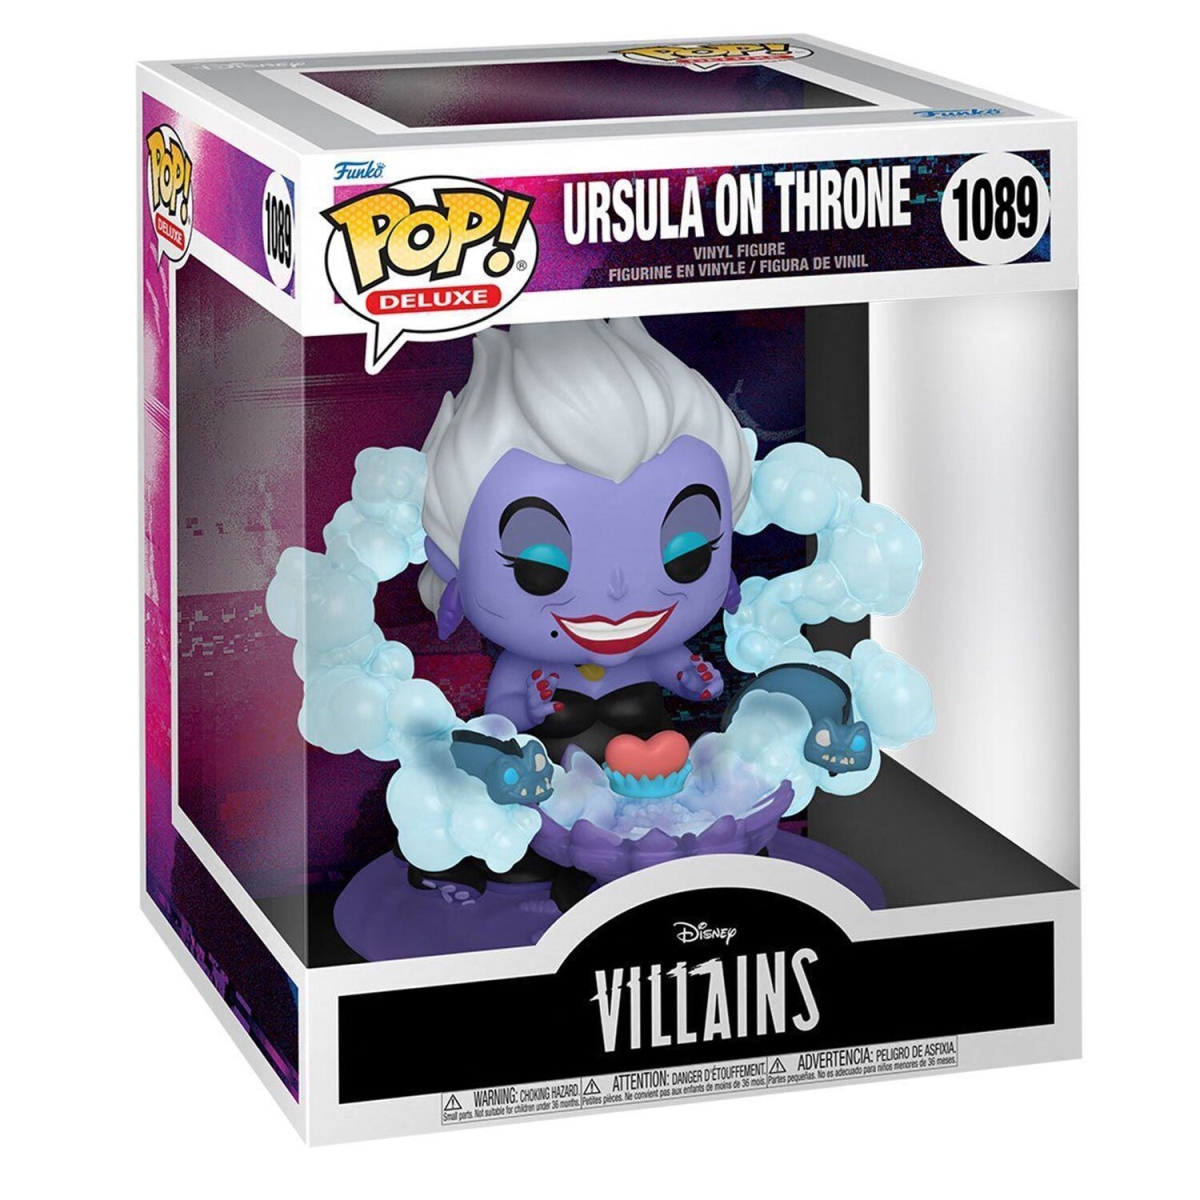 Picture of Funko 304456 21 x 17 x 14 cm Pop Deluxe Villains Ursula on Throne Toy Figures